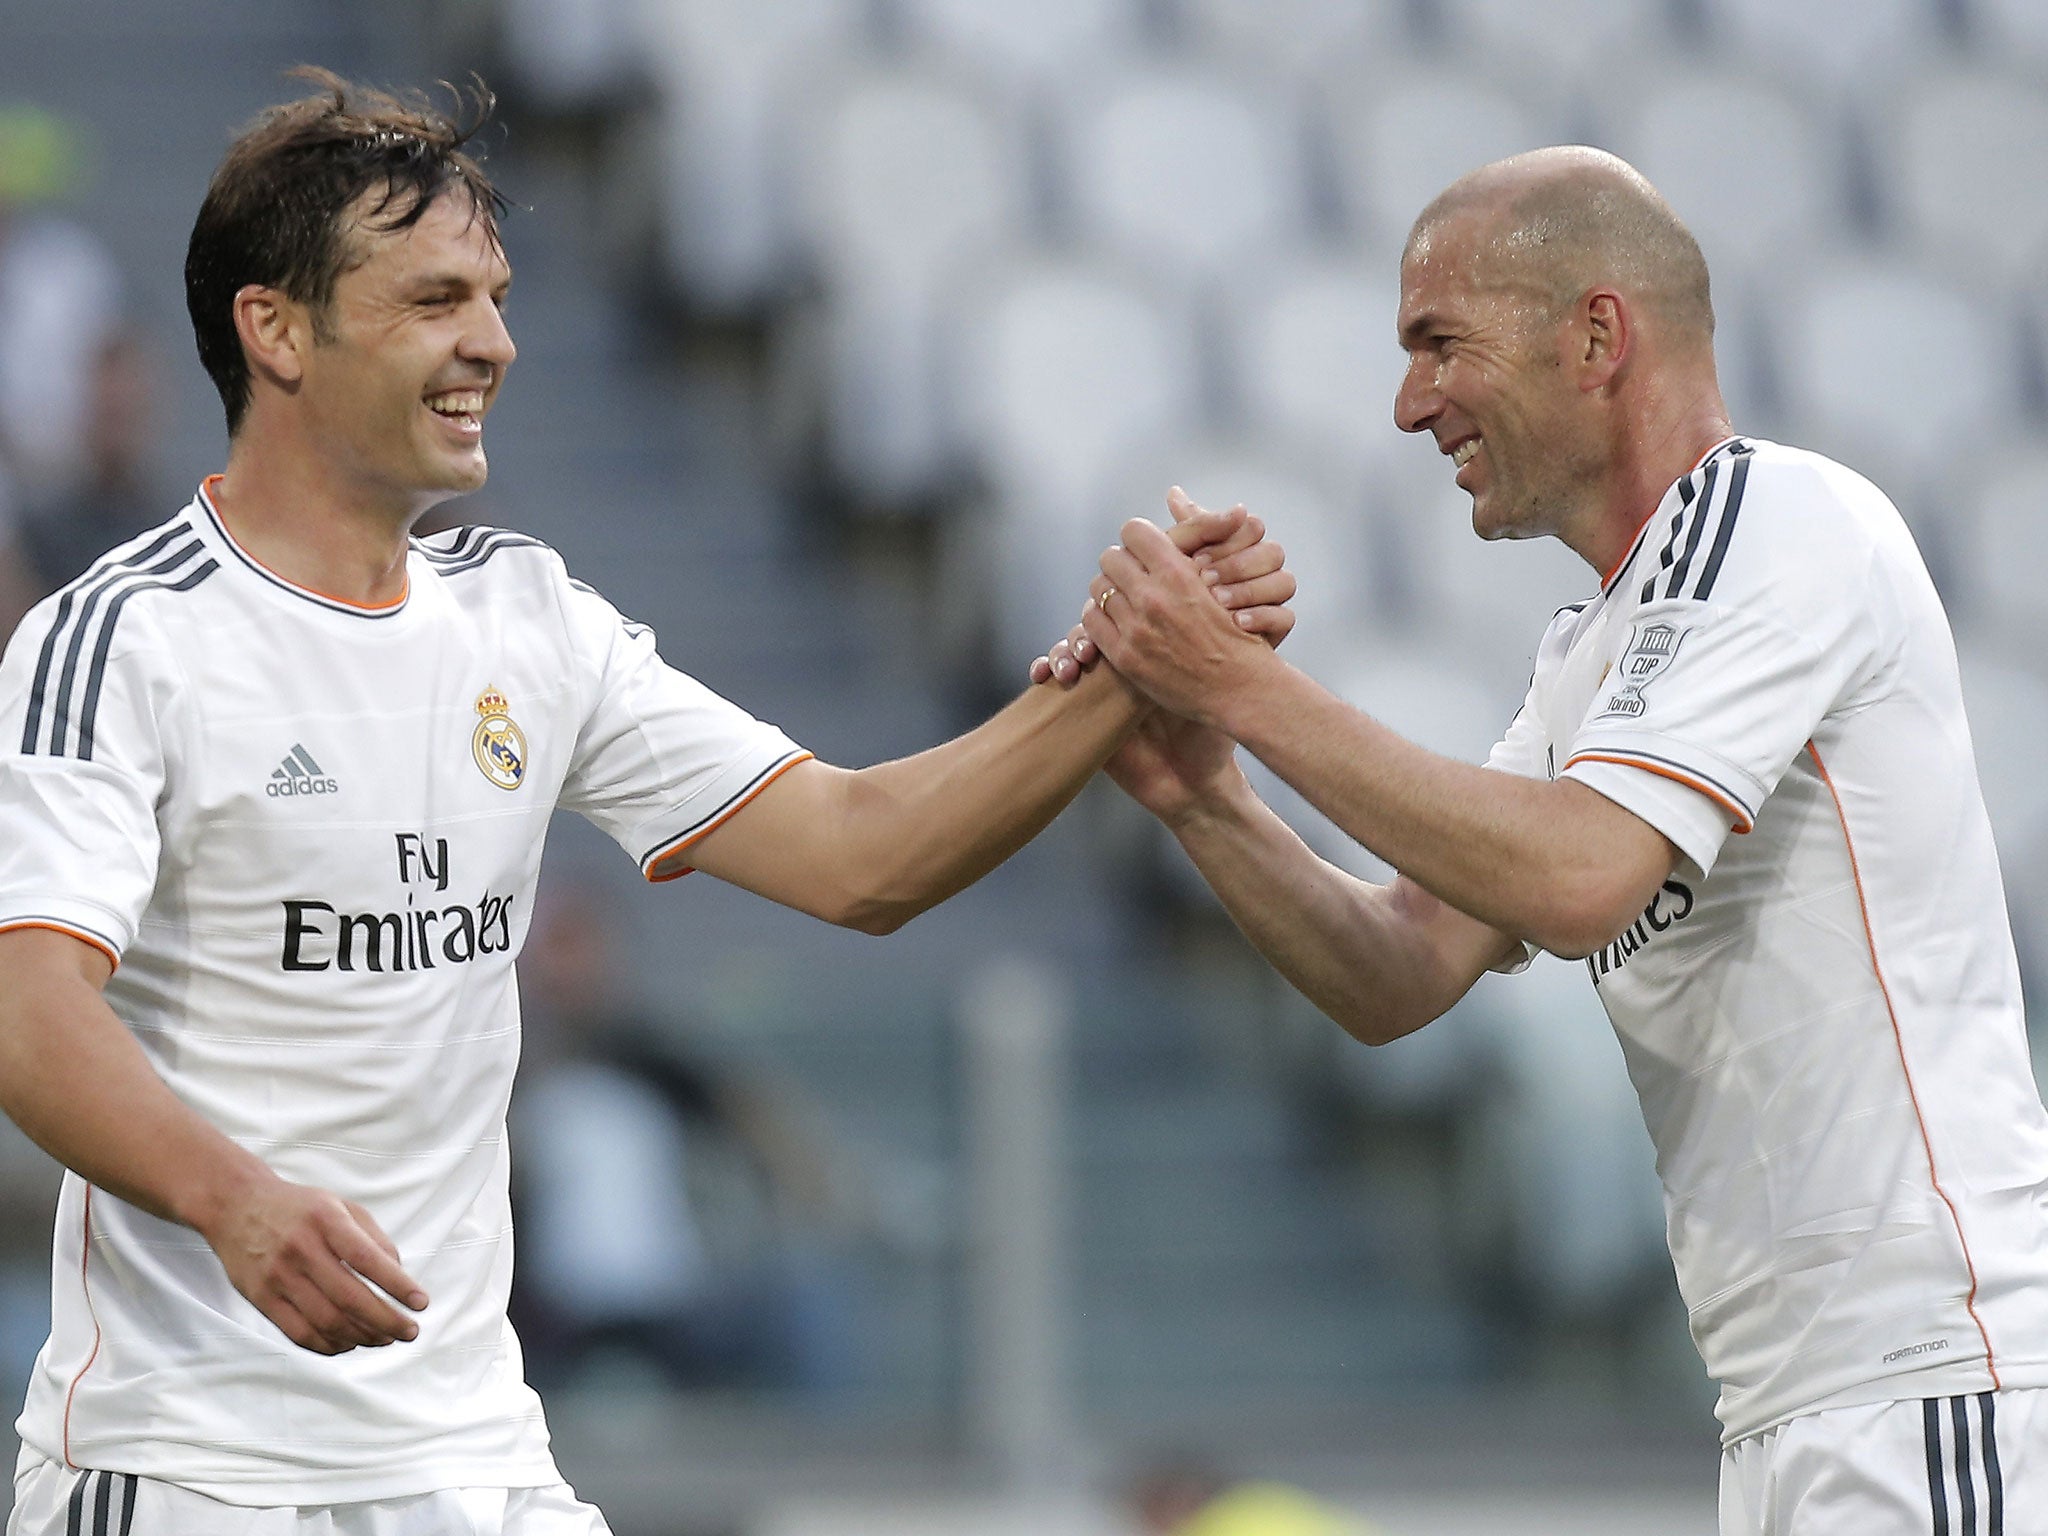 Real Madrid's forward Sanchez Fernando Morientes (L) celebrates with his teammate Zinedine Zidane after scoring during the Unesco Cup football match Juventus Legends vs Real Madrid Leyendas